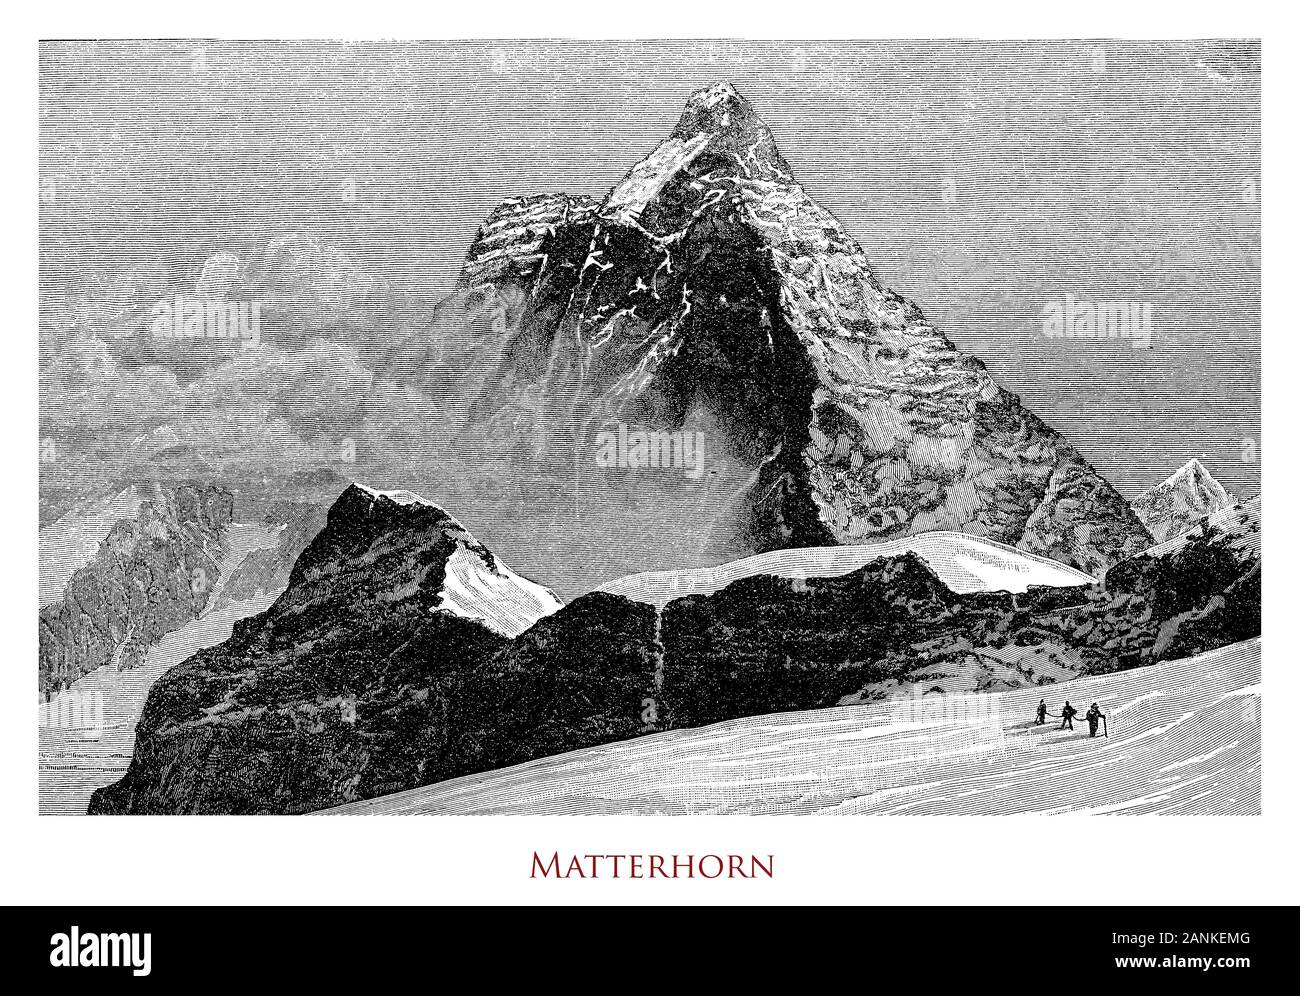 Vintage illustration of Matterhorn or Cervino between Switzerland and Italy, isolated mountain with a steep pyramidal shape, one of the highest peak of the Alps Stock Photo